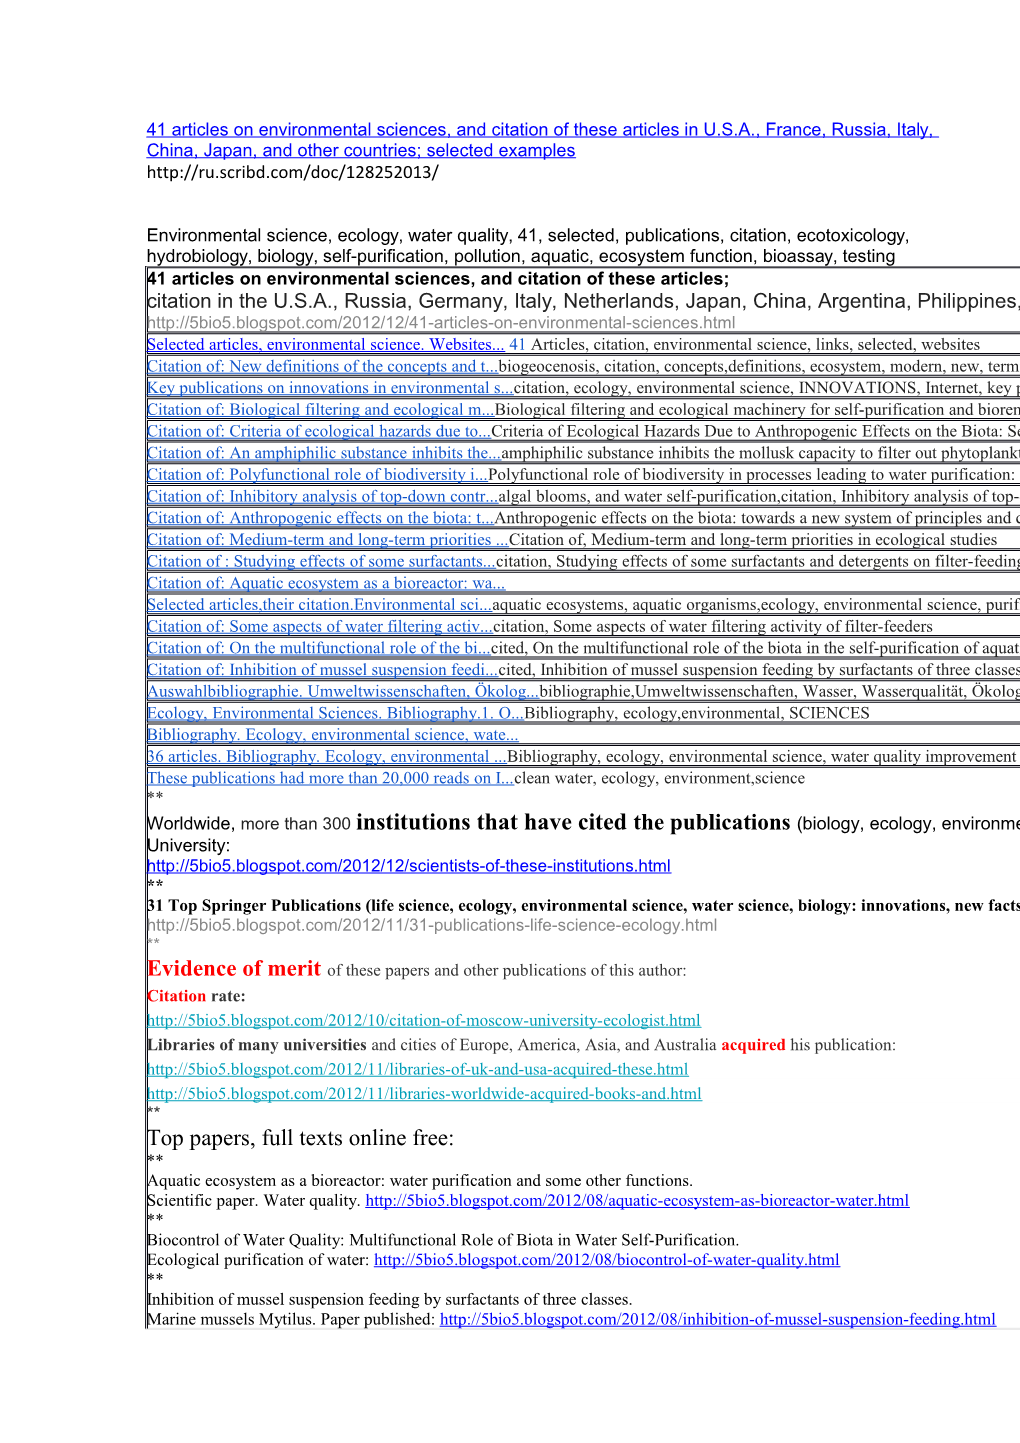 41 Articles on Environmental Sciences, and Citation of These Articles in U.S.A., France